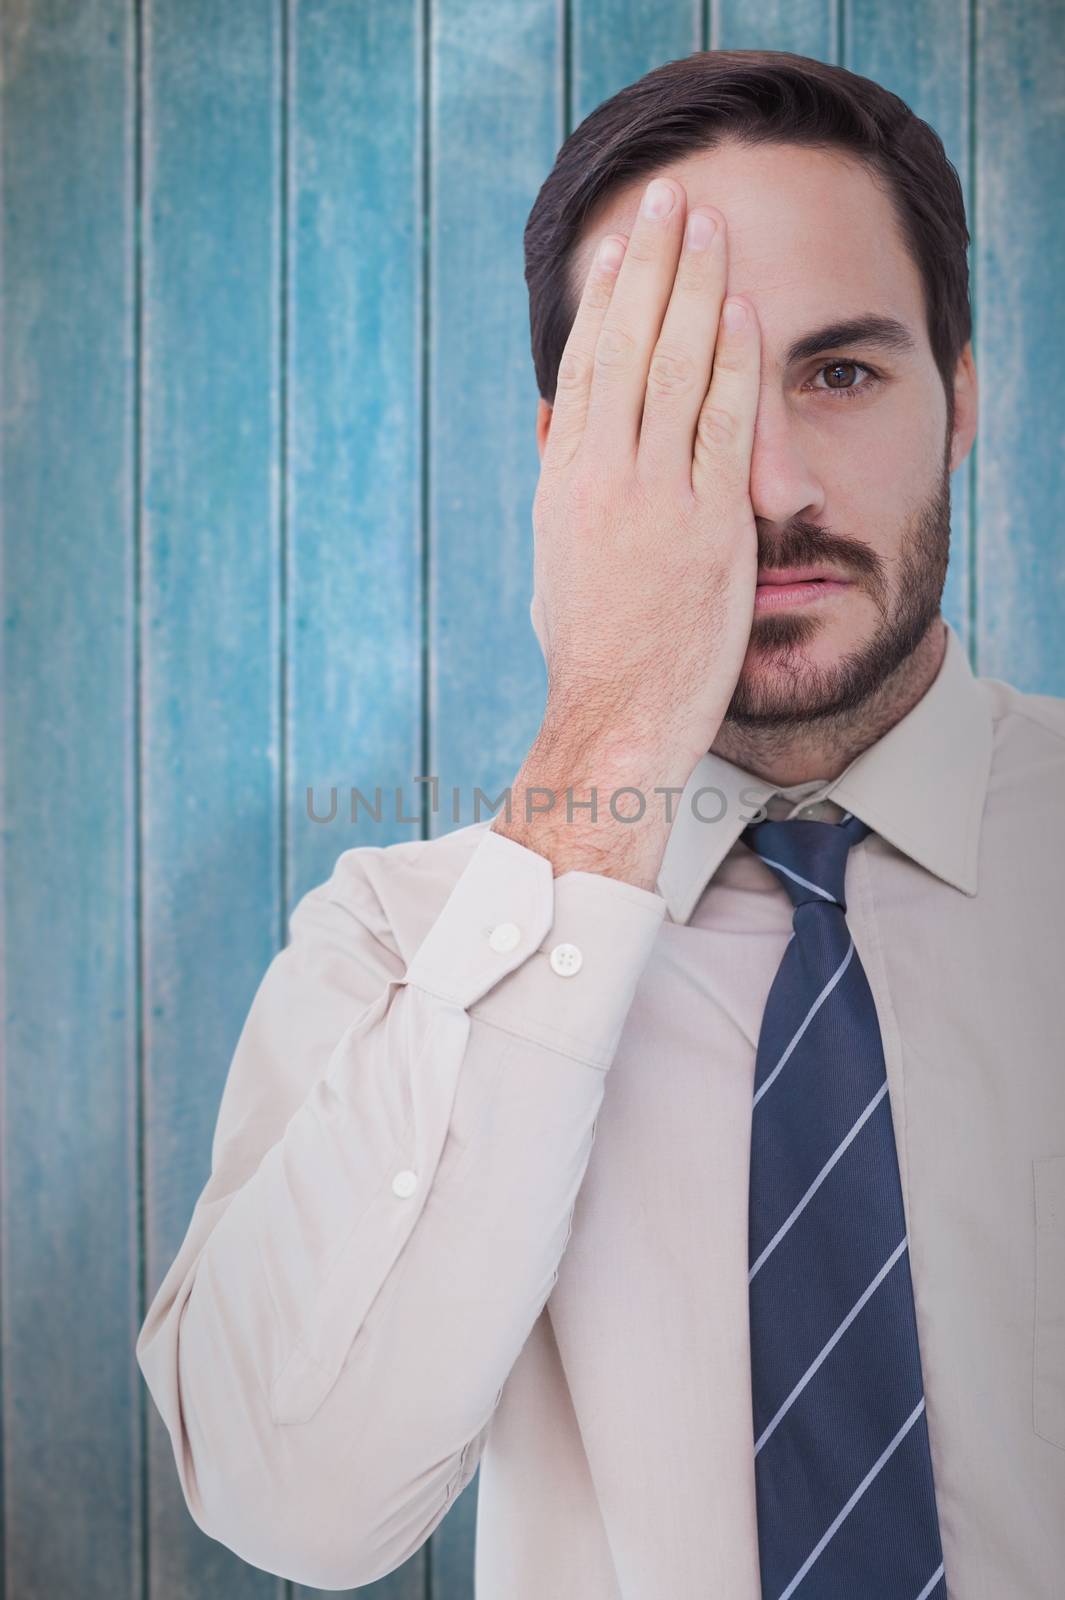 Unsmiling patient looking at camera with one eye  against wooden planks